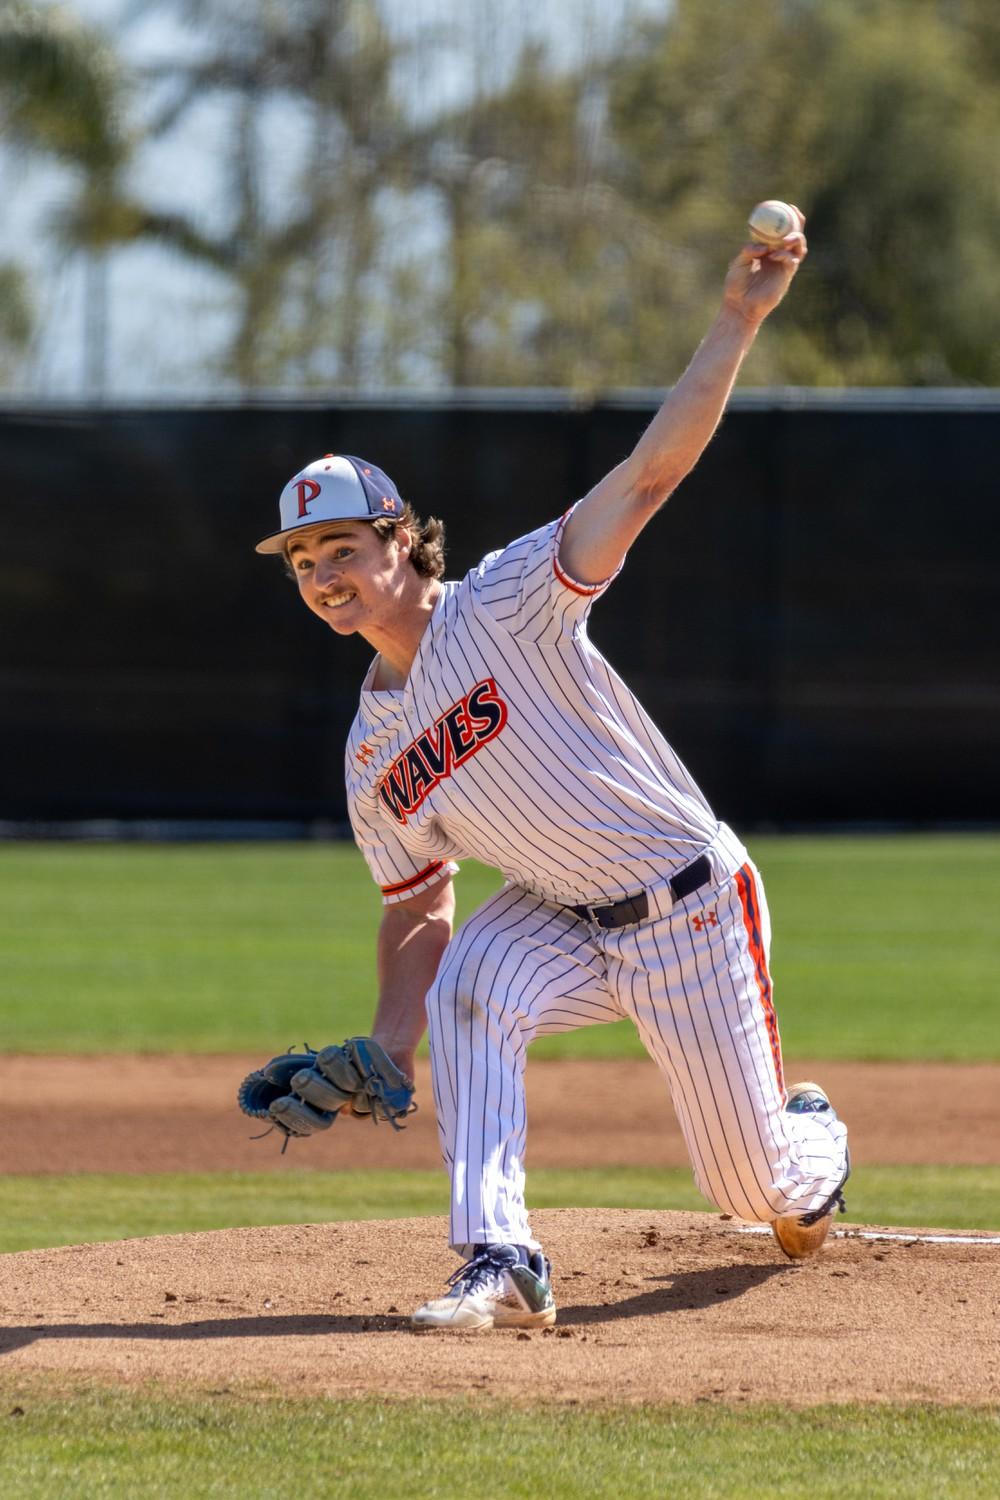 Senior pitcher Shane Telfer at the mound for the Waves on March 24-25, at Eddy. D. Field Stadium. Pepperdine would limit Gonzaga to only two hits in the first game of the series.